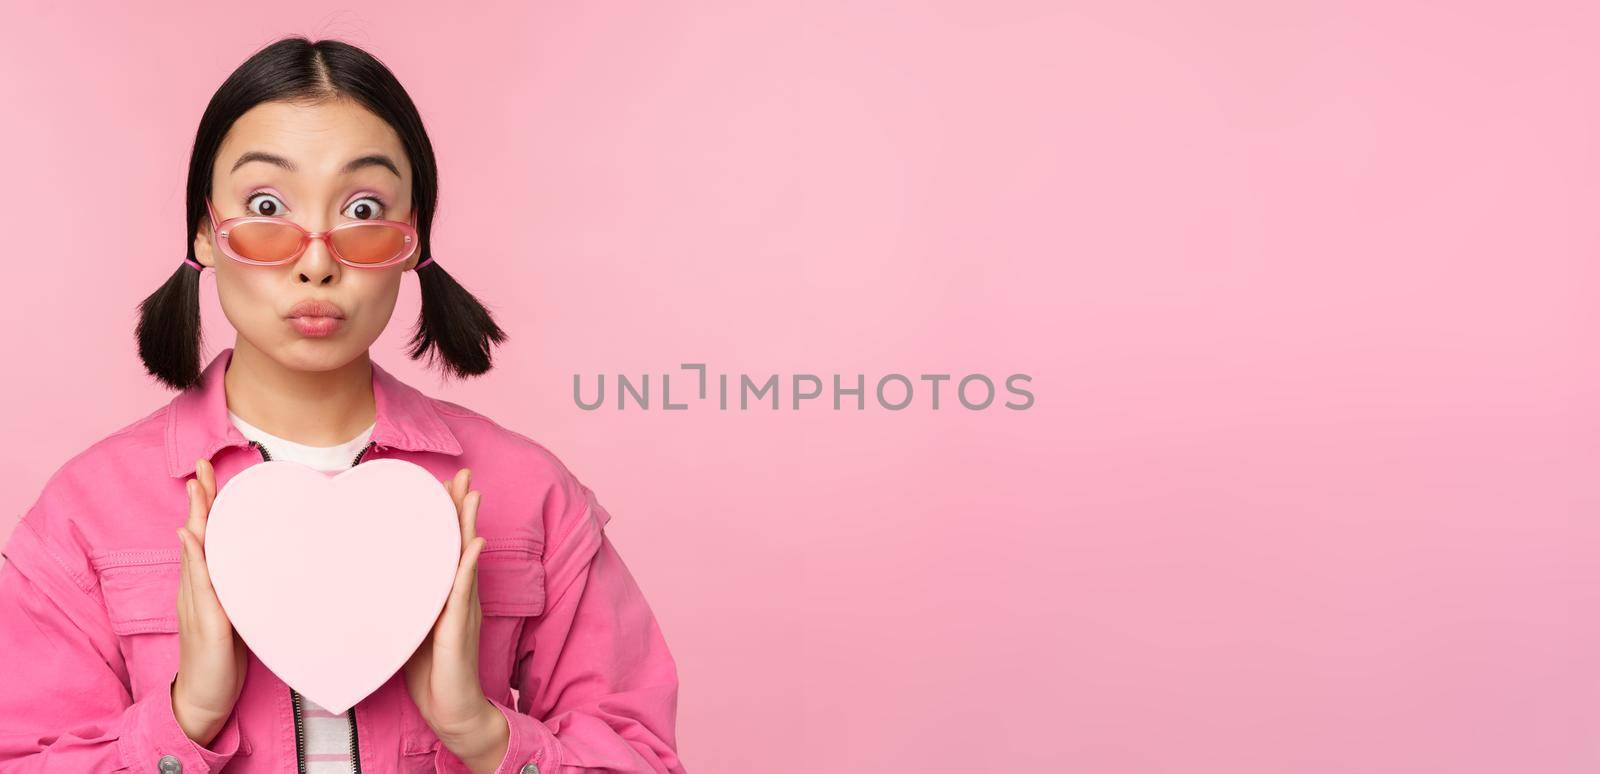 Cute asian girl showing heart shaped box with gift, looking surprised and excited, romantic present concept, wearing sunglasses, standing over pink background by Benzoix